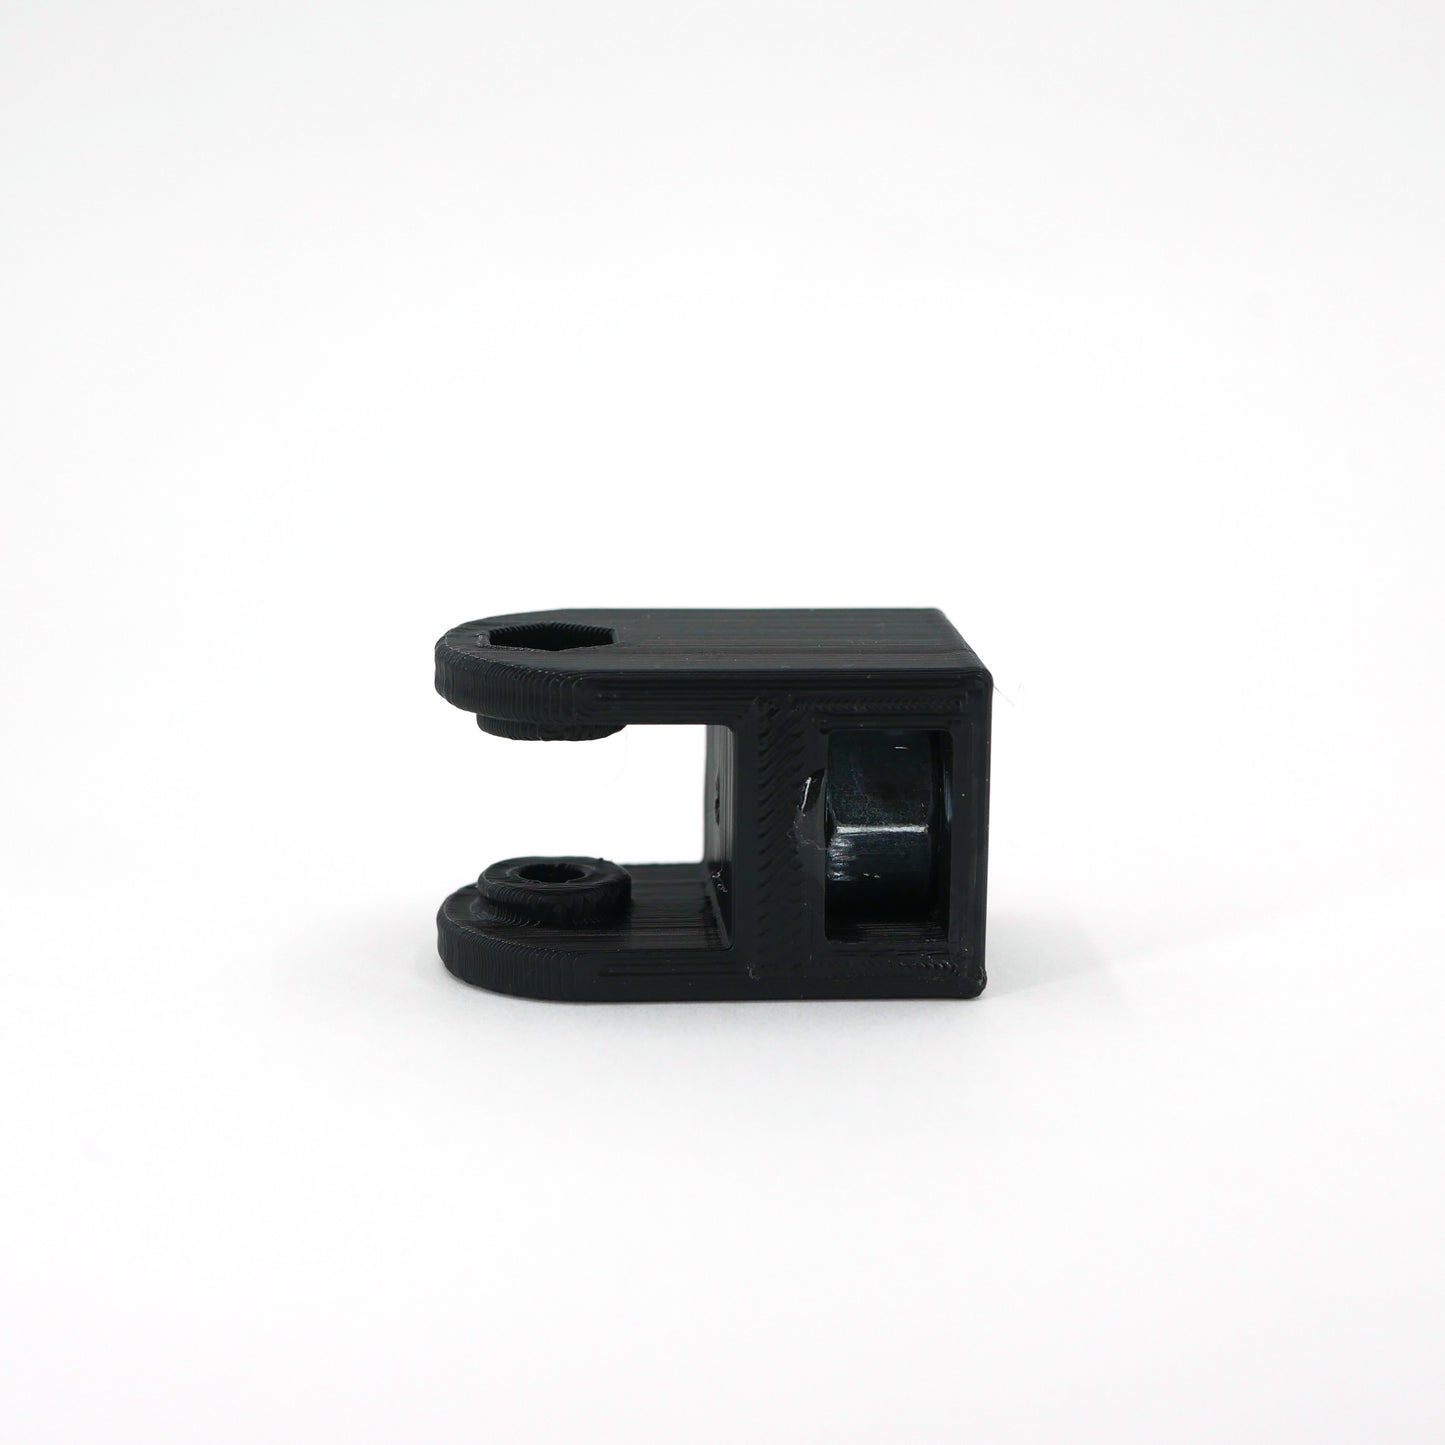 The front of a black HyperX SoloCast microphone mount adapter.